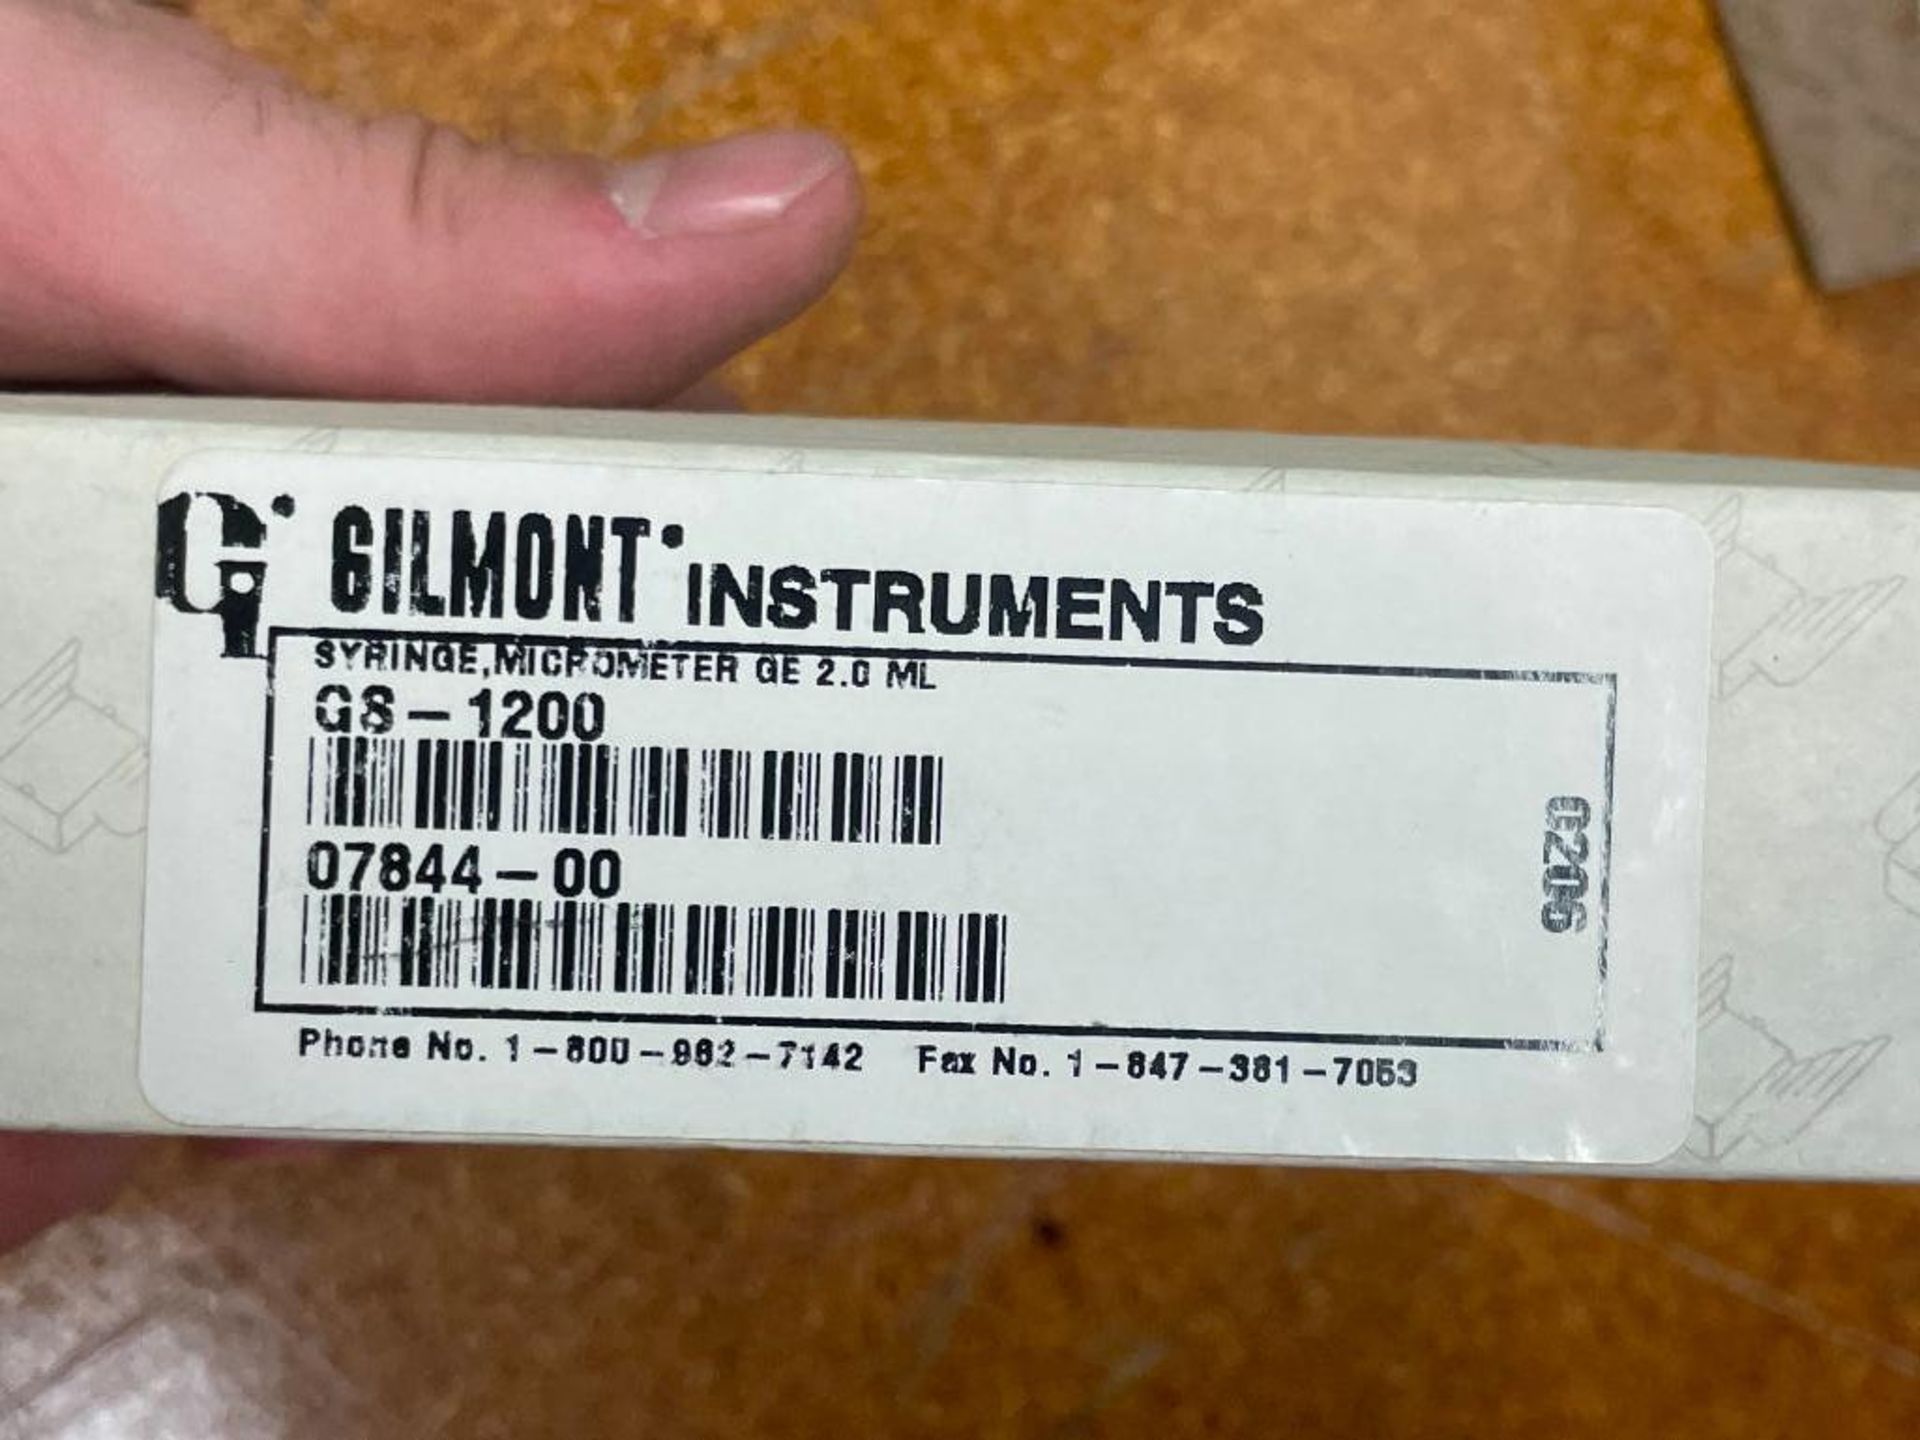 (2) 2.0 ML MICROMETER SYRINGES BRAND/MODEL: GILMONT GS-1200 QTY: 2 - Image 2 of 3